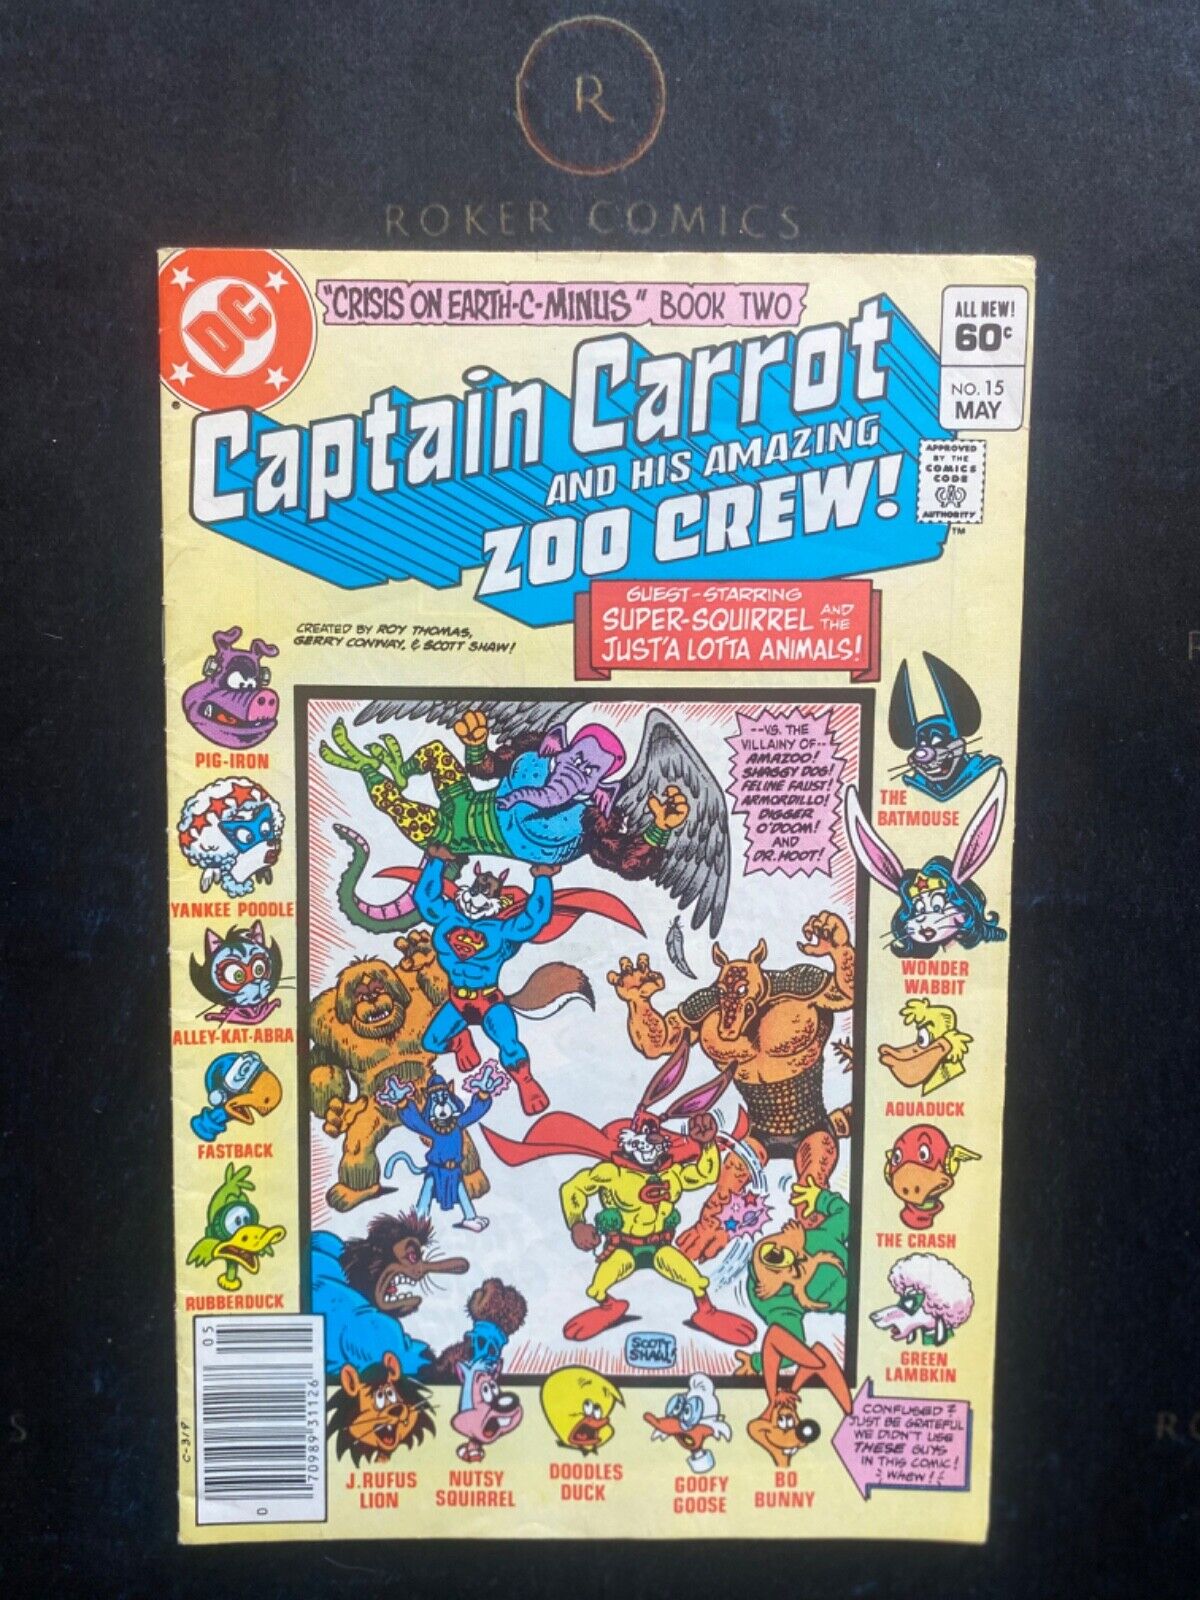 Captain Carrot and His Amazing Zoo Crew #1 (DC Comics, March 1982)